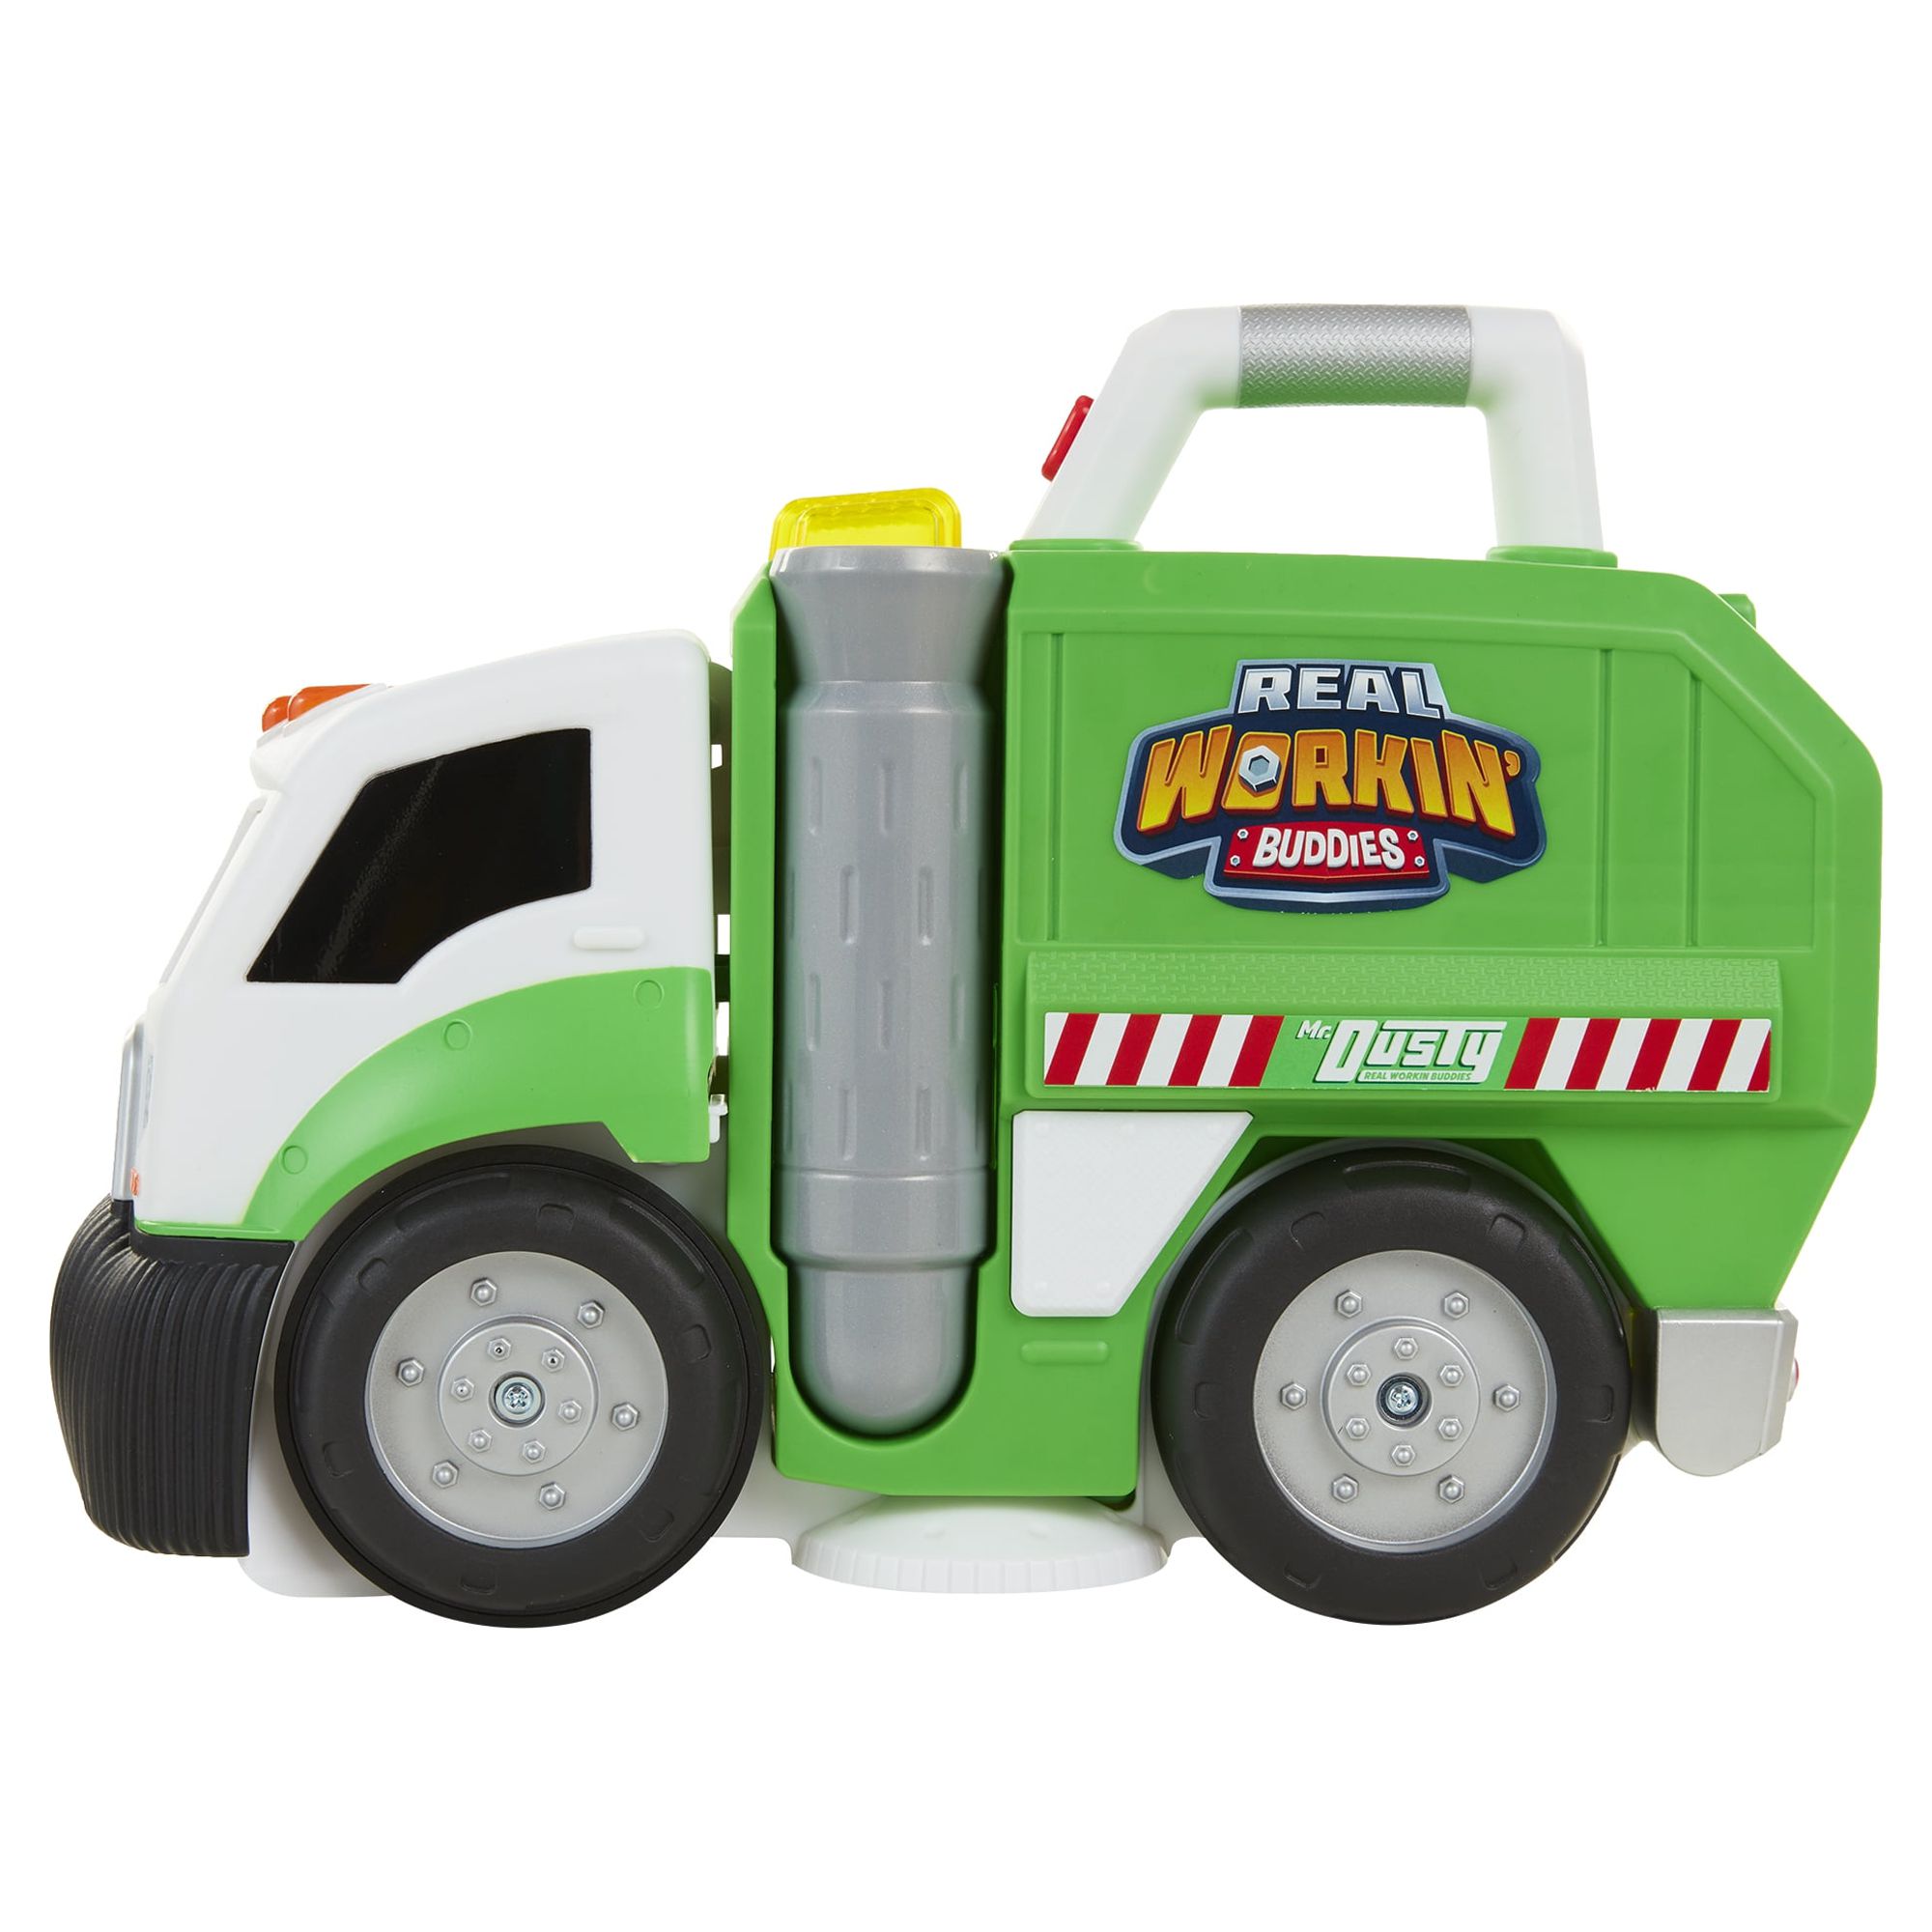 Mr. Dusty The Super Duper Toy Eating Garbage Truck, Picks up small toys (Building Blocks, toy cars, etc.) - image 1 of 5